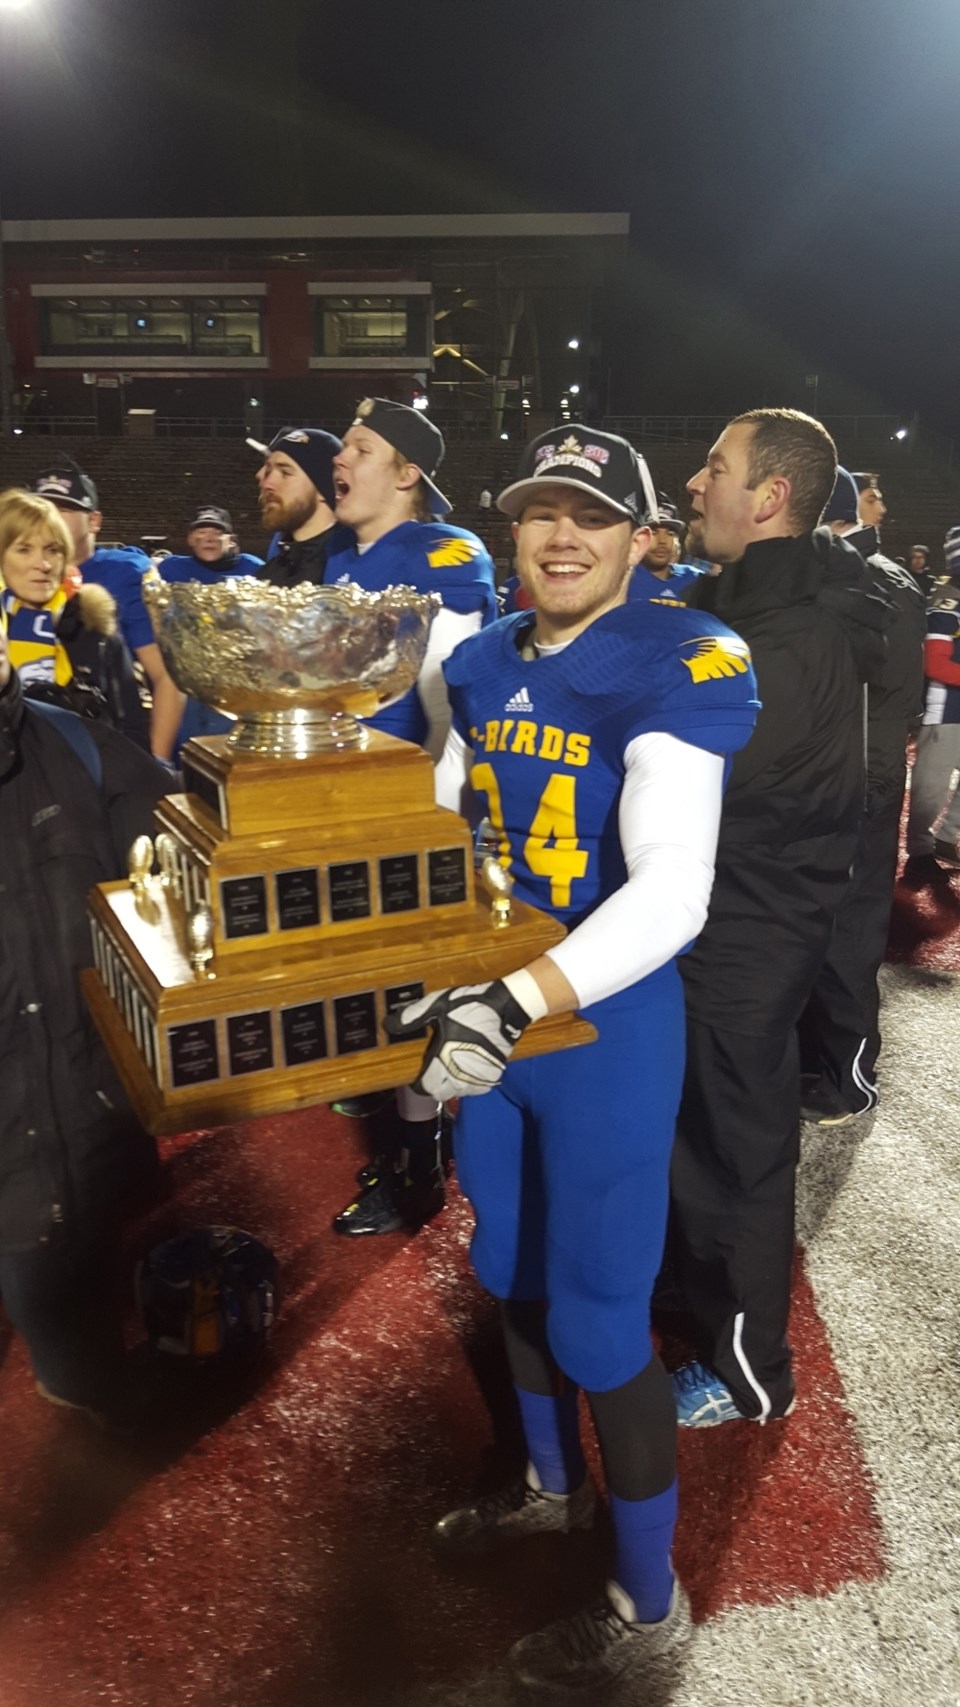 Former Olds resident DJ Neustaeter holds the Vanier Cup after his new team, the UBC Thunderbirds, won the Canadian university football championship 26-23 over the Montreal